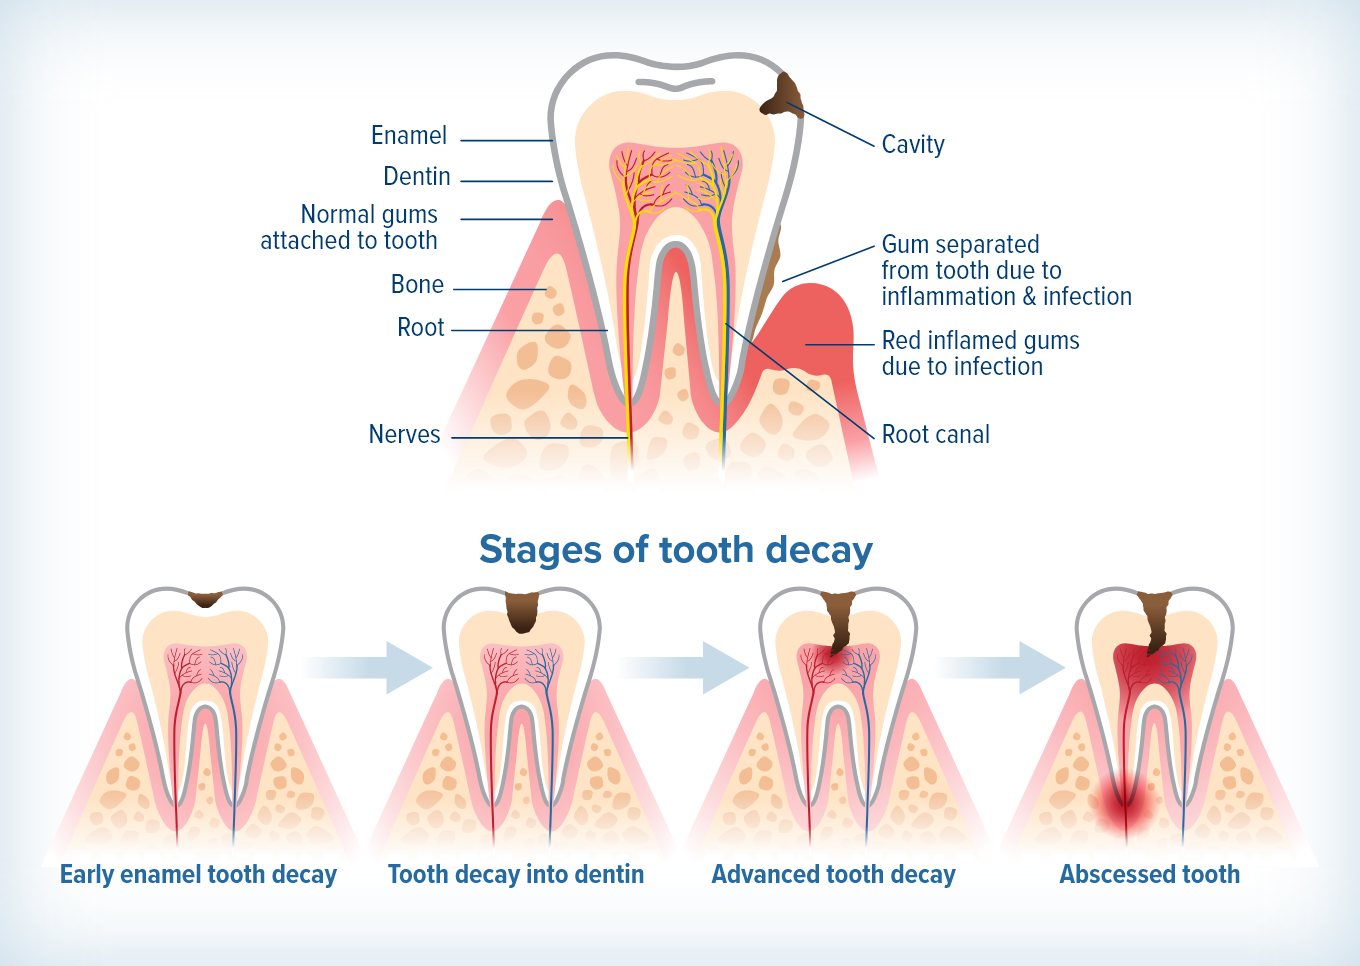 infographic showing the progression of tooth decay form early enamel tooth decay to abscessed tooth.